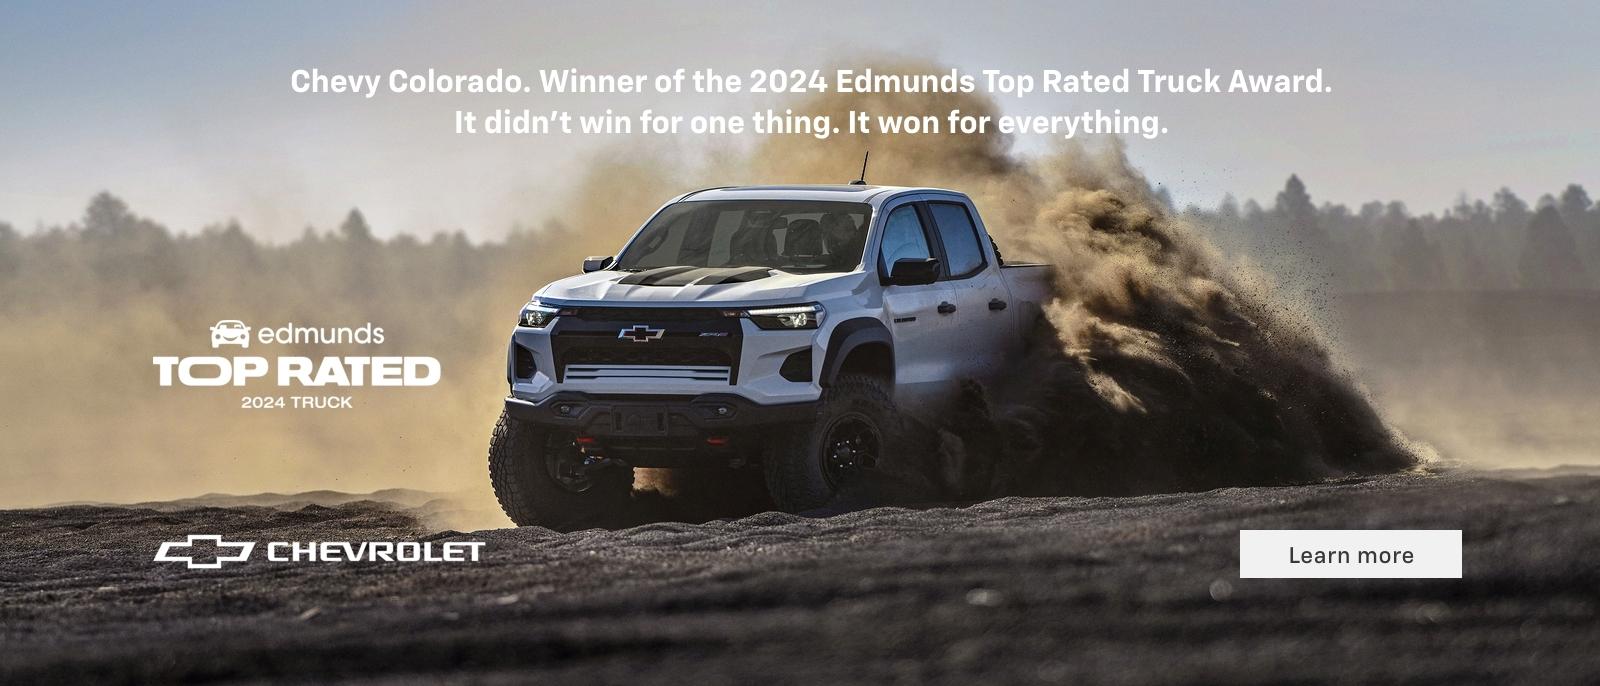 Chevy Colorado. Winner of the 2024 Edmunds Top Rated Truck Award. It didn't win for one thing. It won for everything.